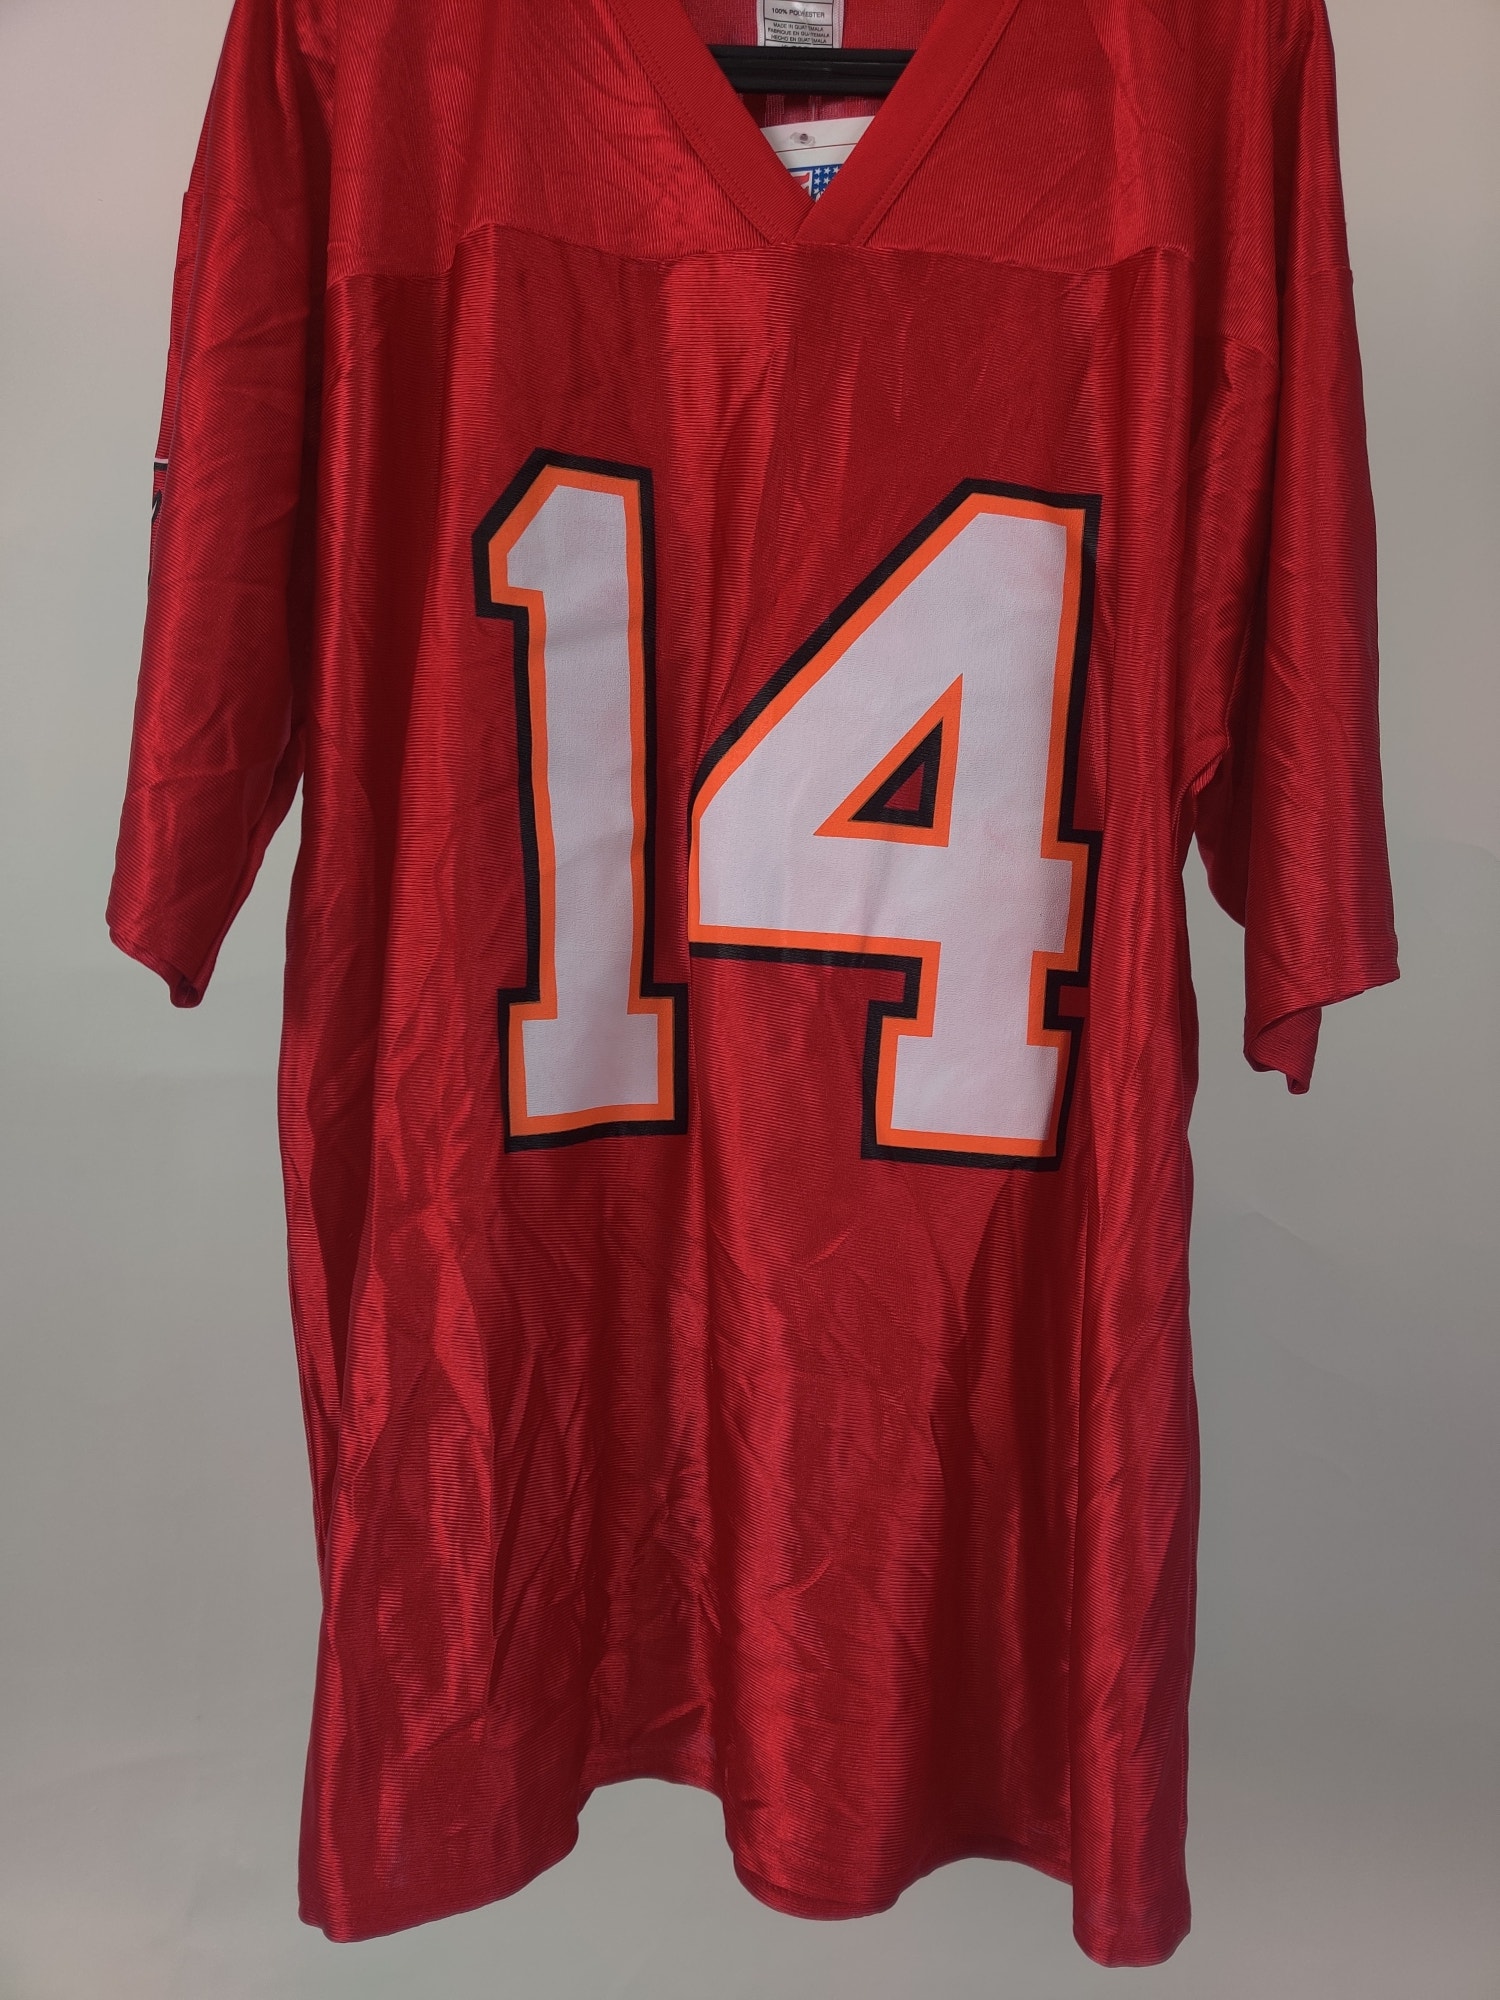 (V)NEW Tampa Bay Buccaneers B. Johnson #14 NFL Jersey Men’s XL - Picture 3 of 9